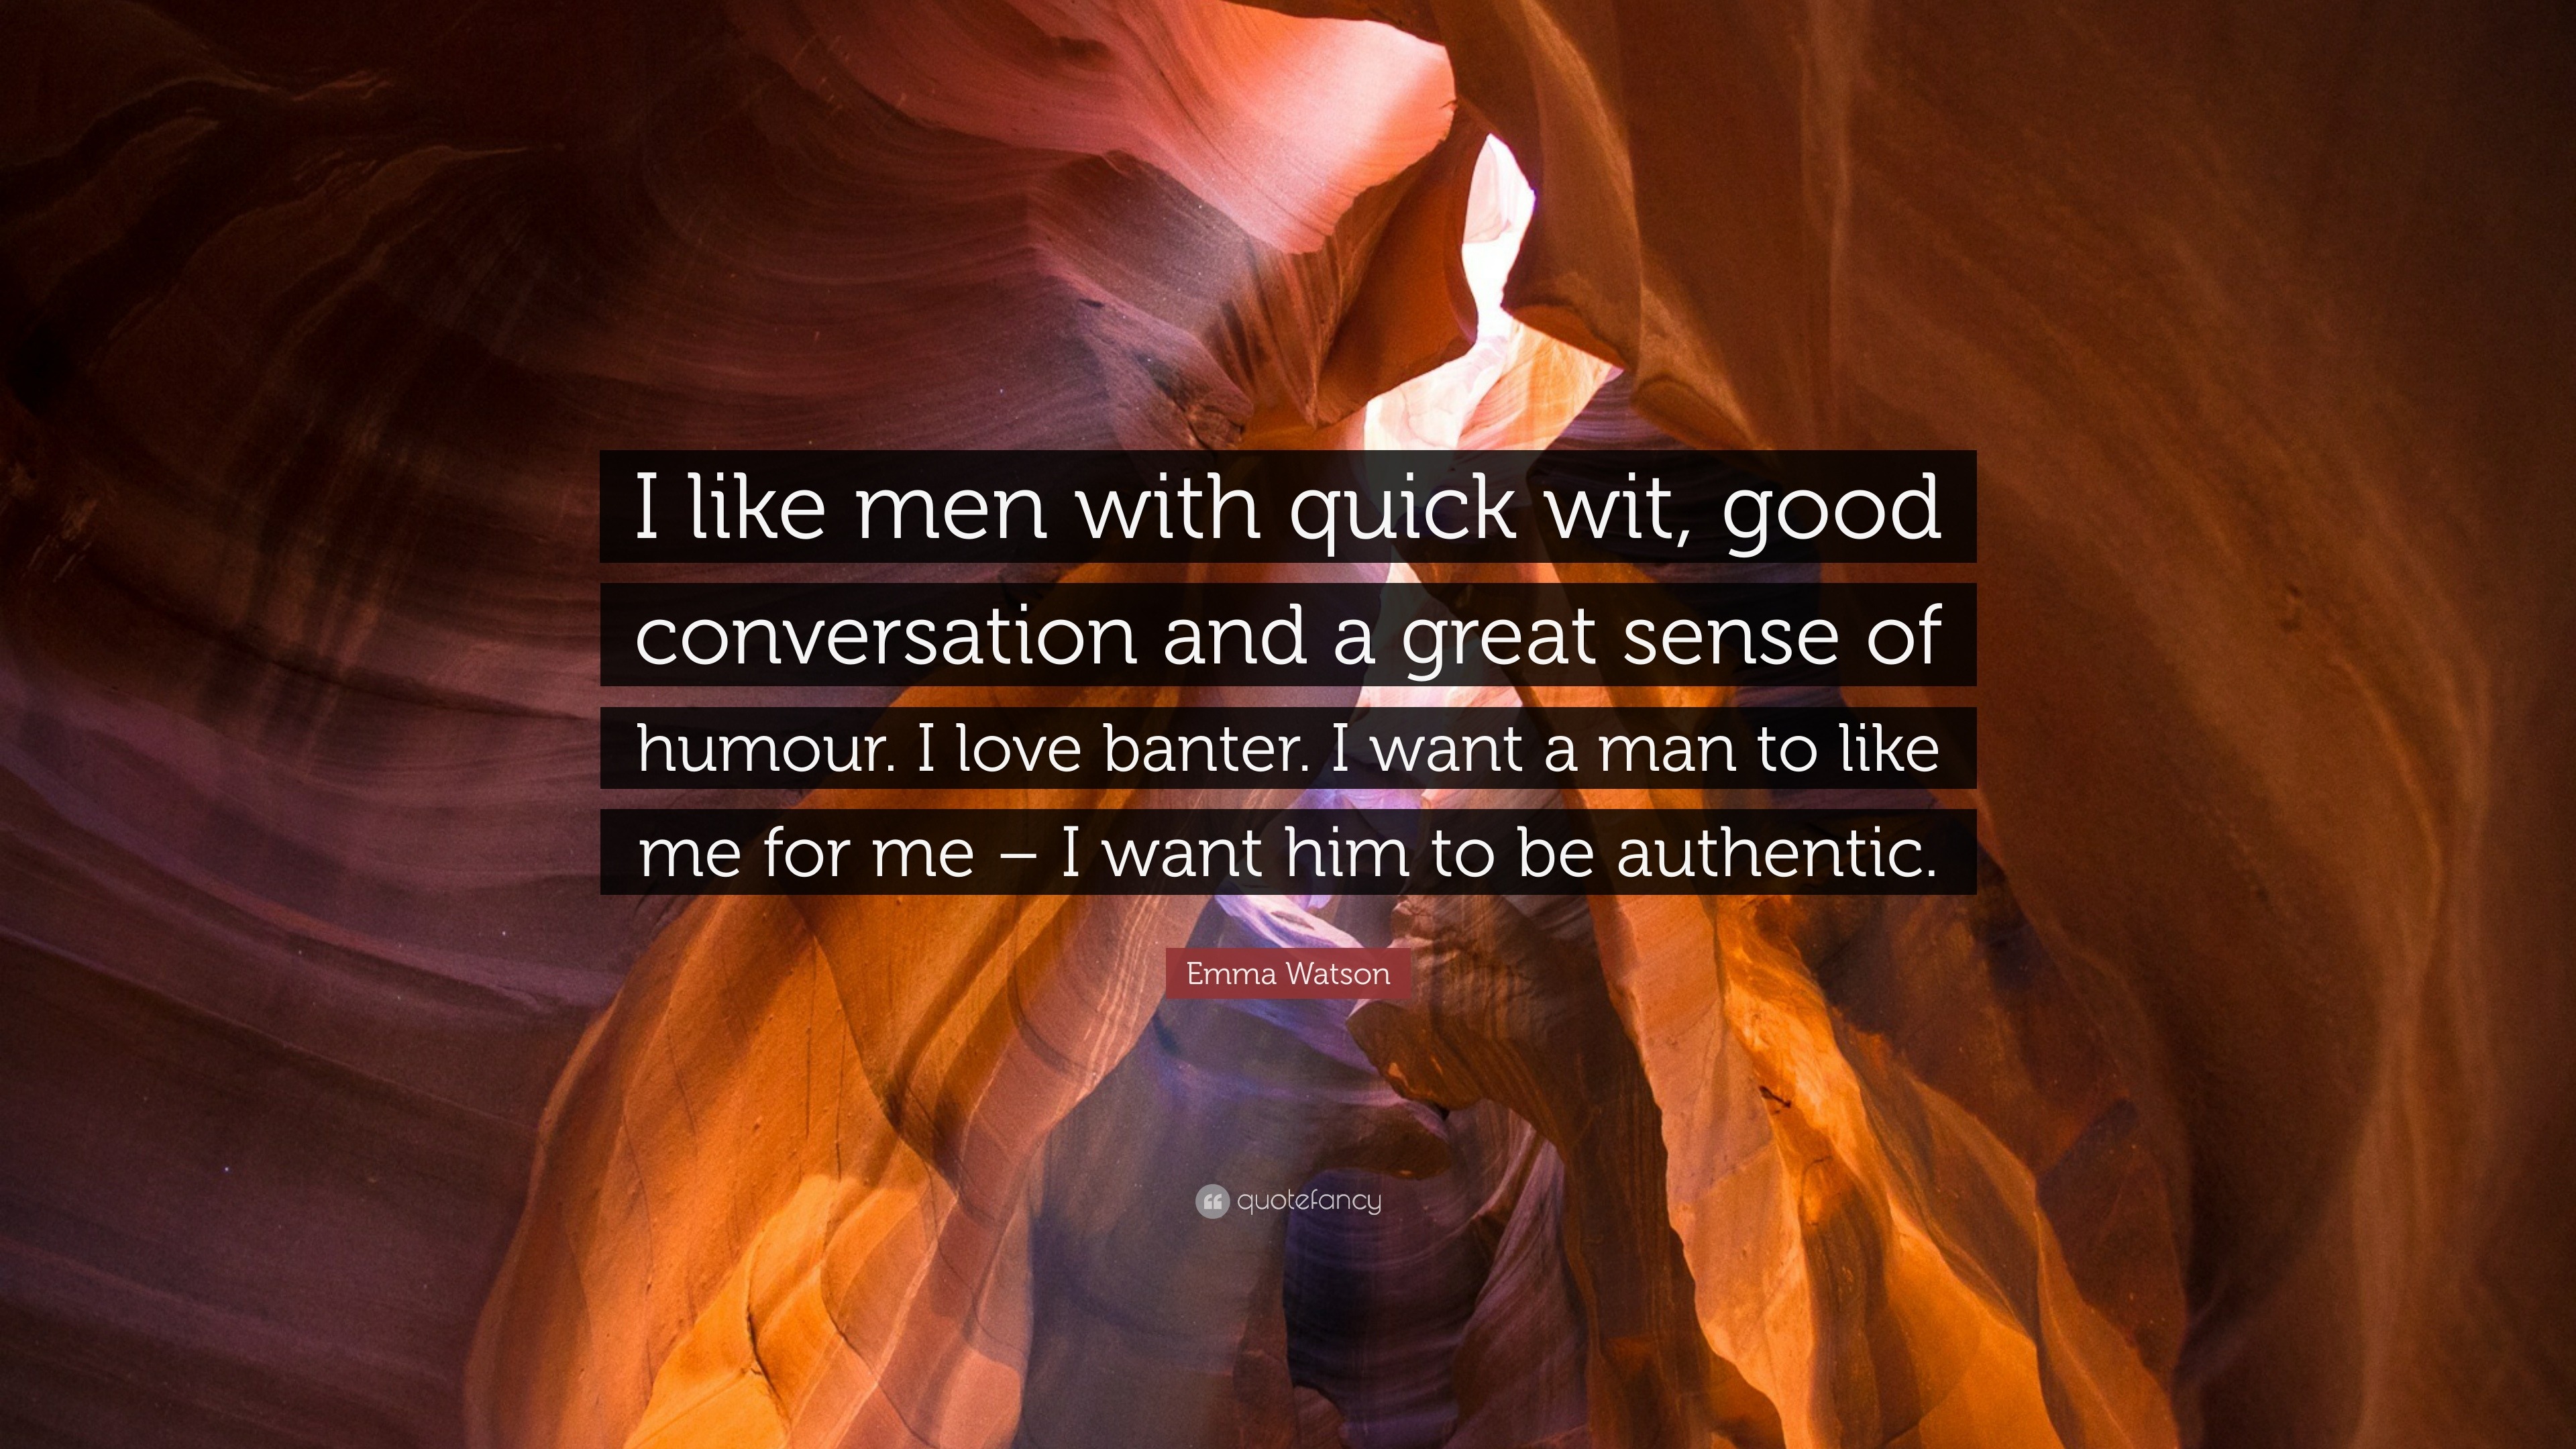 Emma Watson Quote “I like men with quick wit good conversation and a